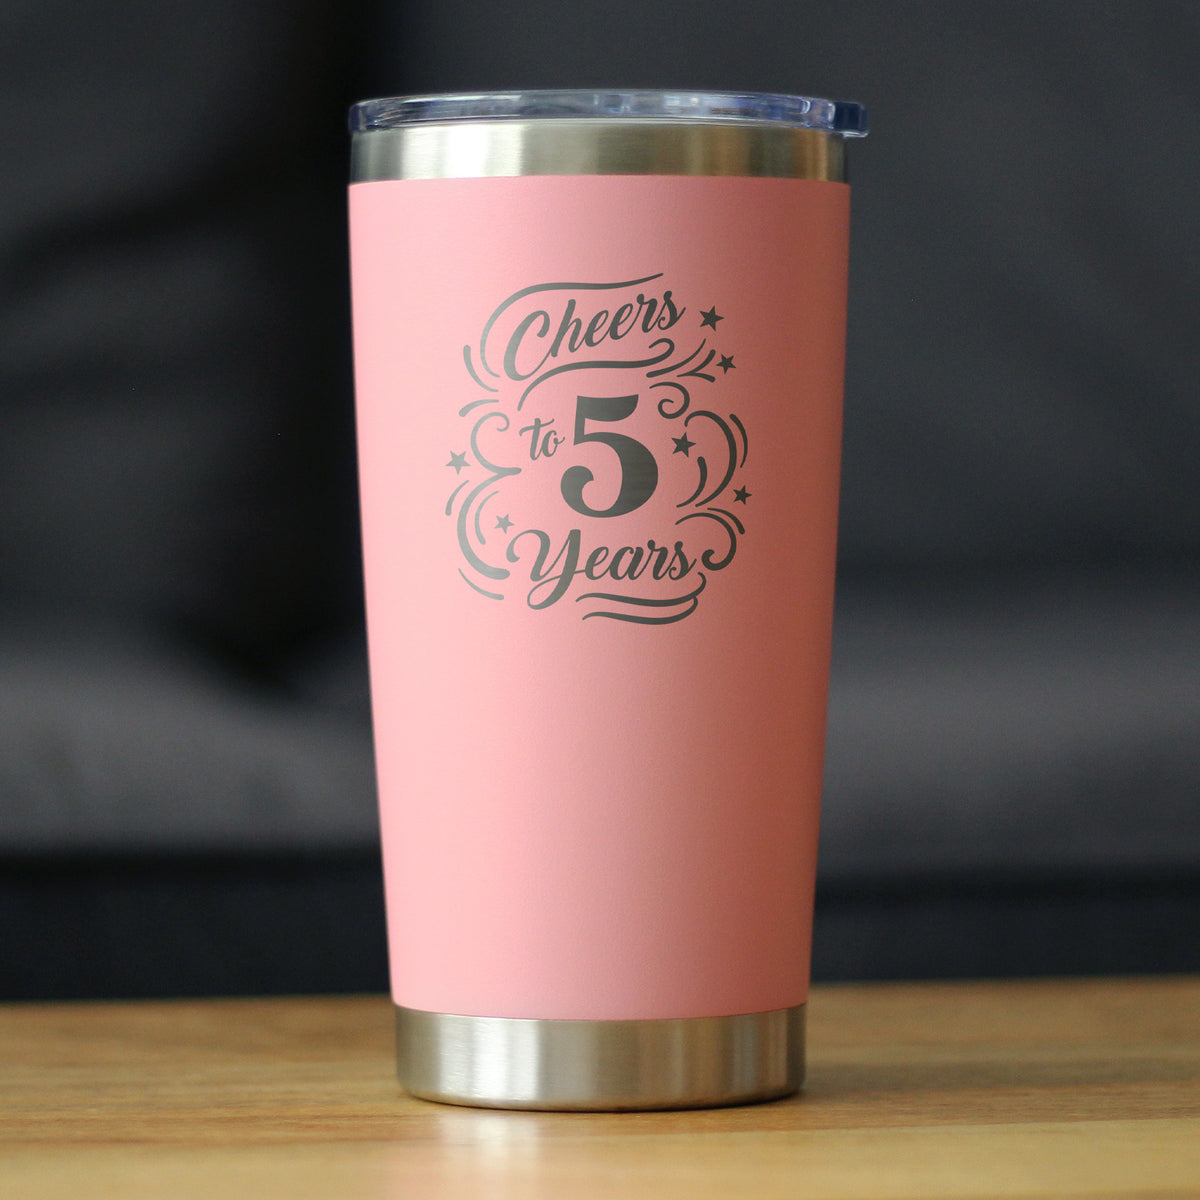 Cheers to 5 Years - Insulated Coffee Tumbler Cup with Sliding Lid - Stainless Steel Insulated Mug - 5th Anniversary Gifts and Party Decor